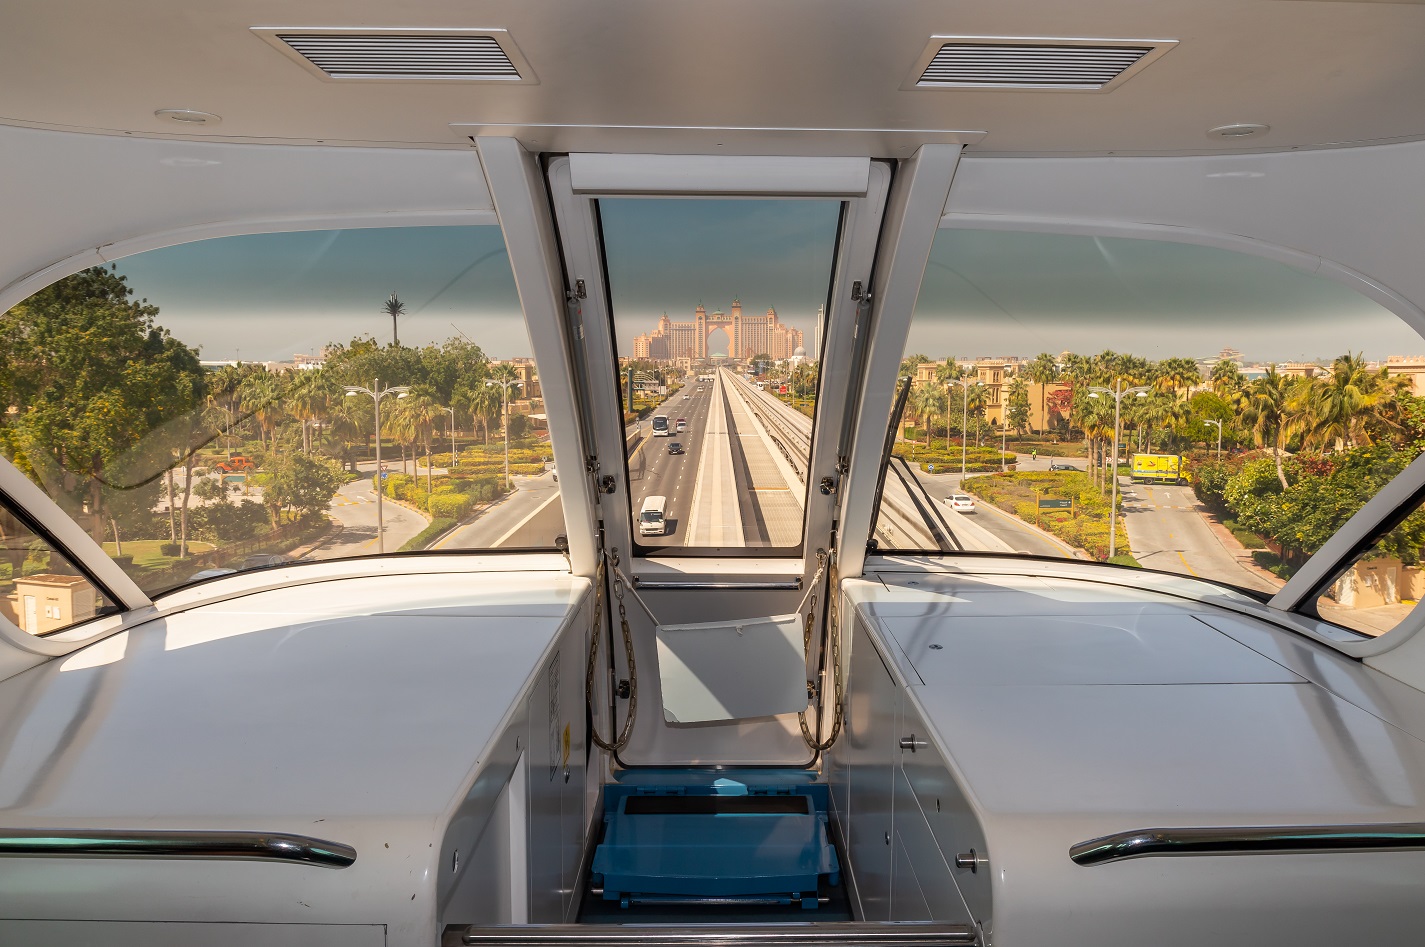 A photo of Atlantis Hotel from within Palm Monorail's cockpit compartment